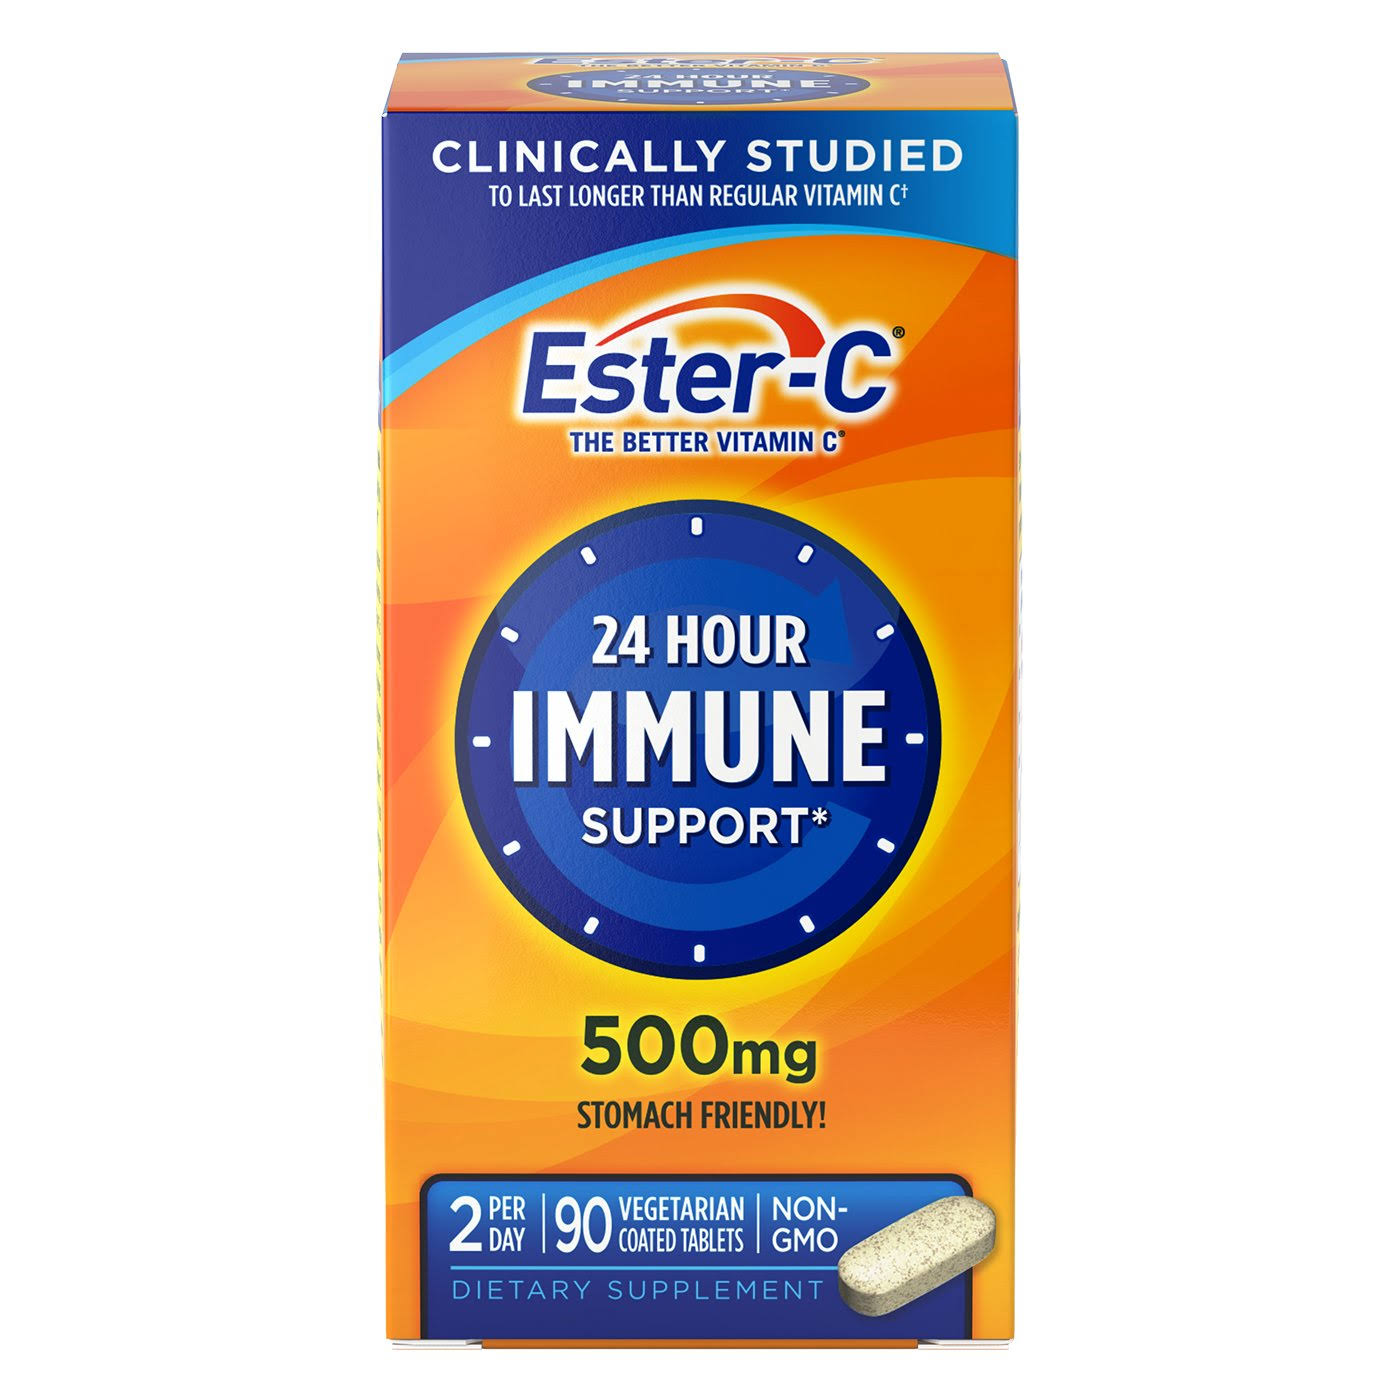 Ester C Better Vitamin C 24 Hour Immune Support Coated Tablet Supplement - 500mg, 90ct